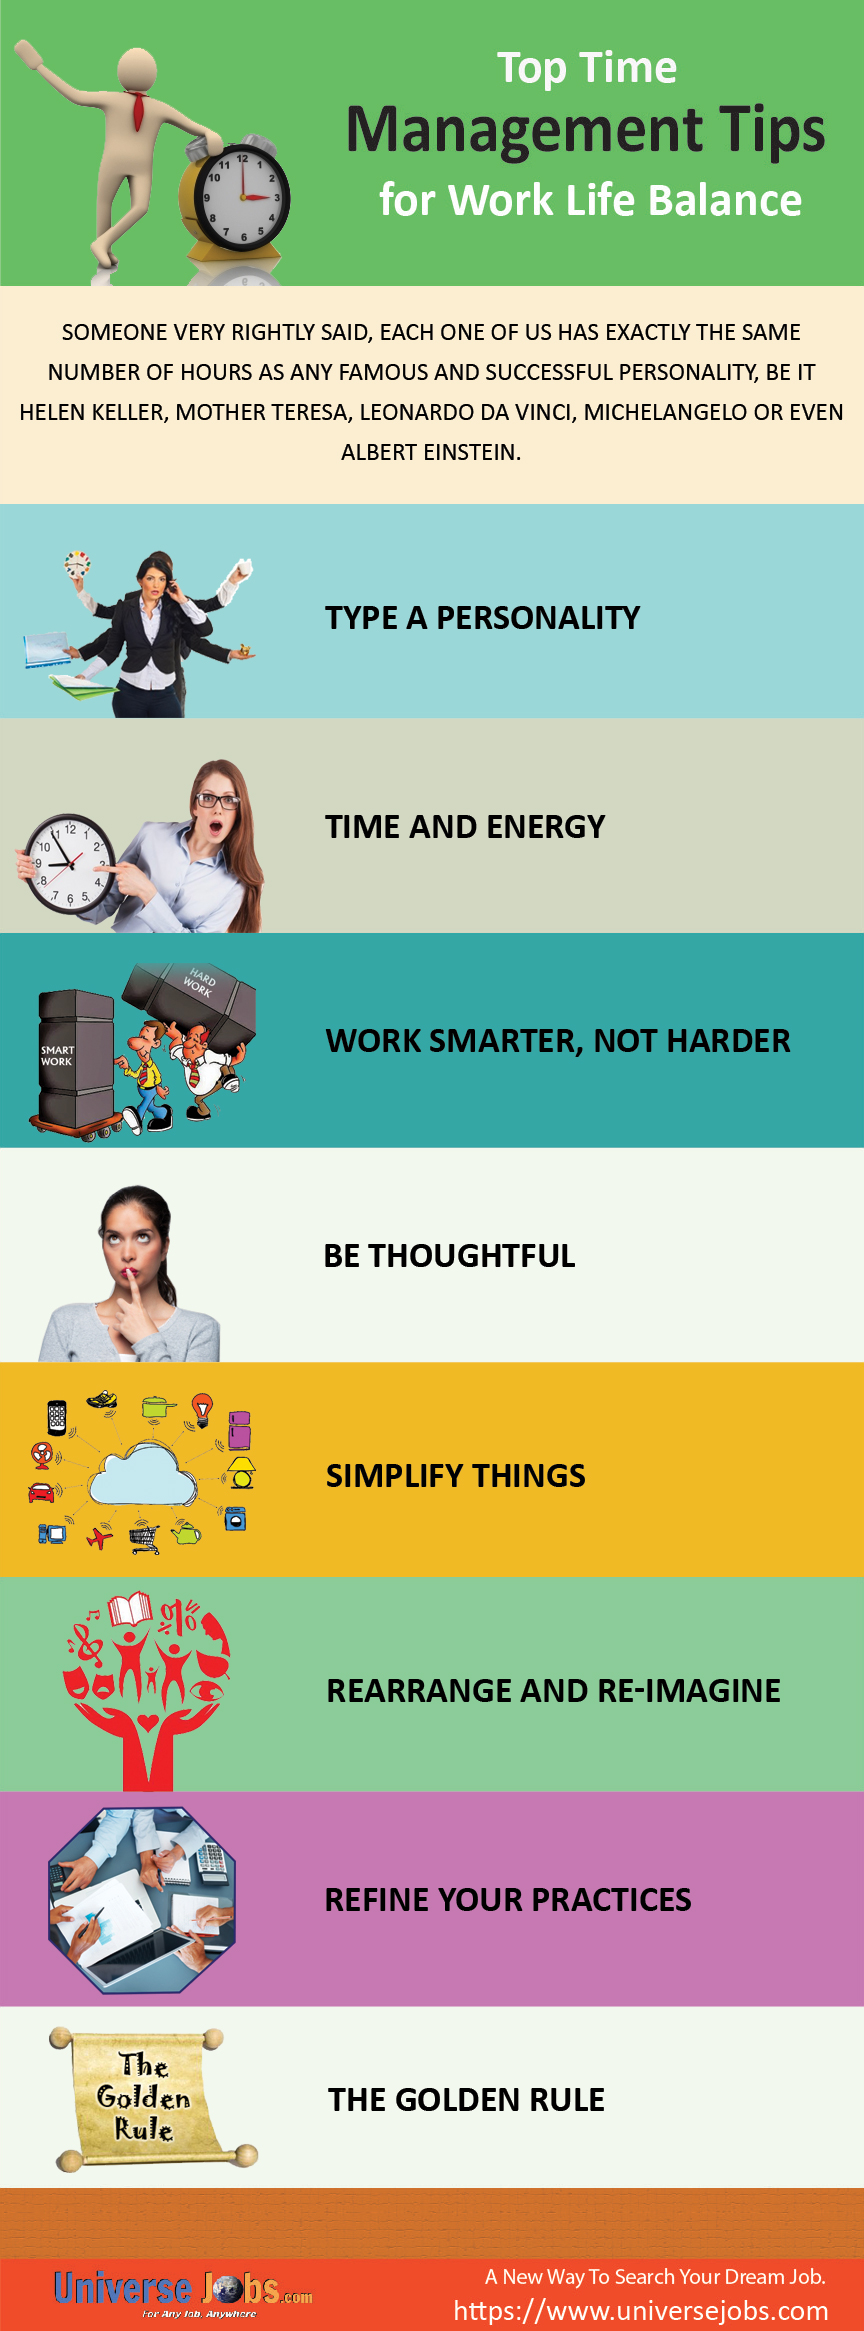 Top Time Management Tips for Work Life Balance